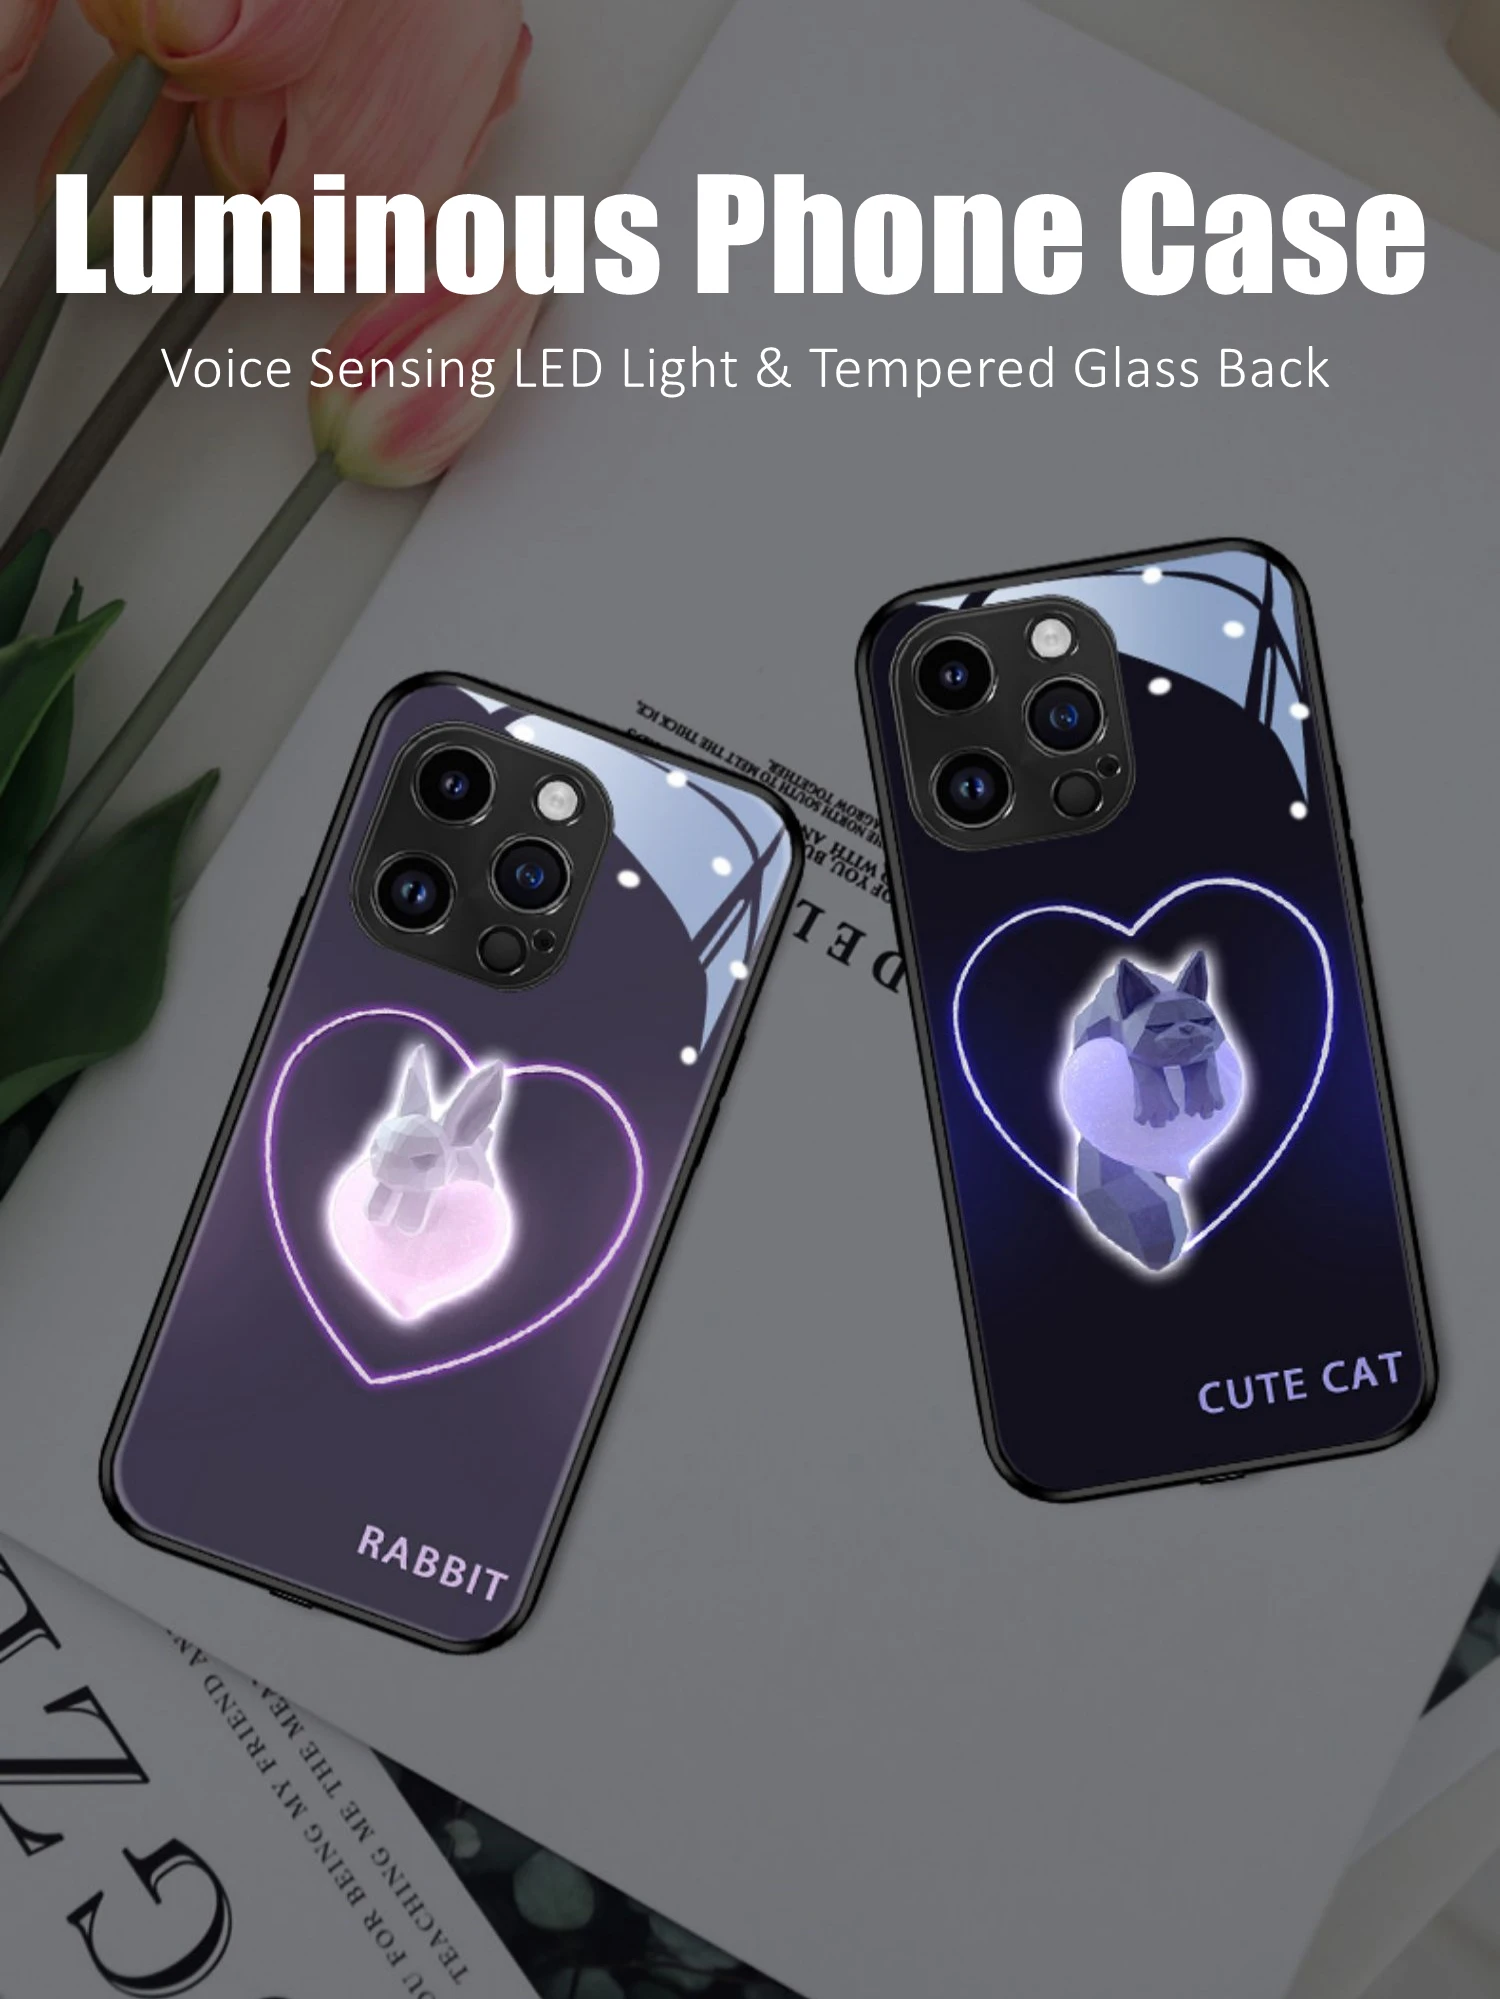 

Rabbit Cat Colorful LED Light Glow Luminous Tempered Glass Phone Case for OnePlus 6 6T 7 7T 8 8T 9 9R 10 Ace Nord N10 N200 Pro